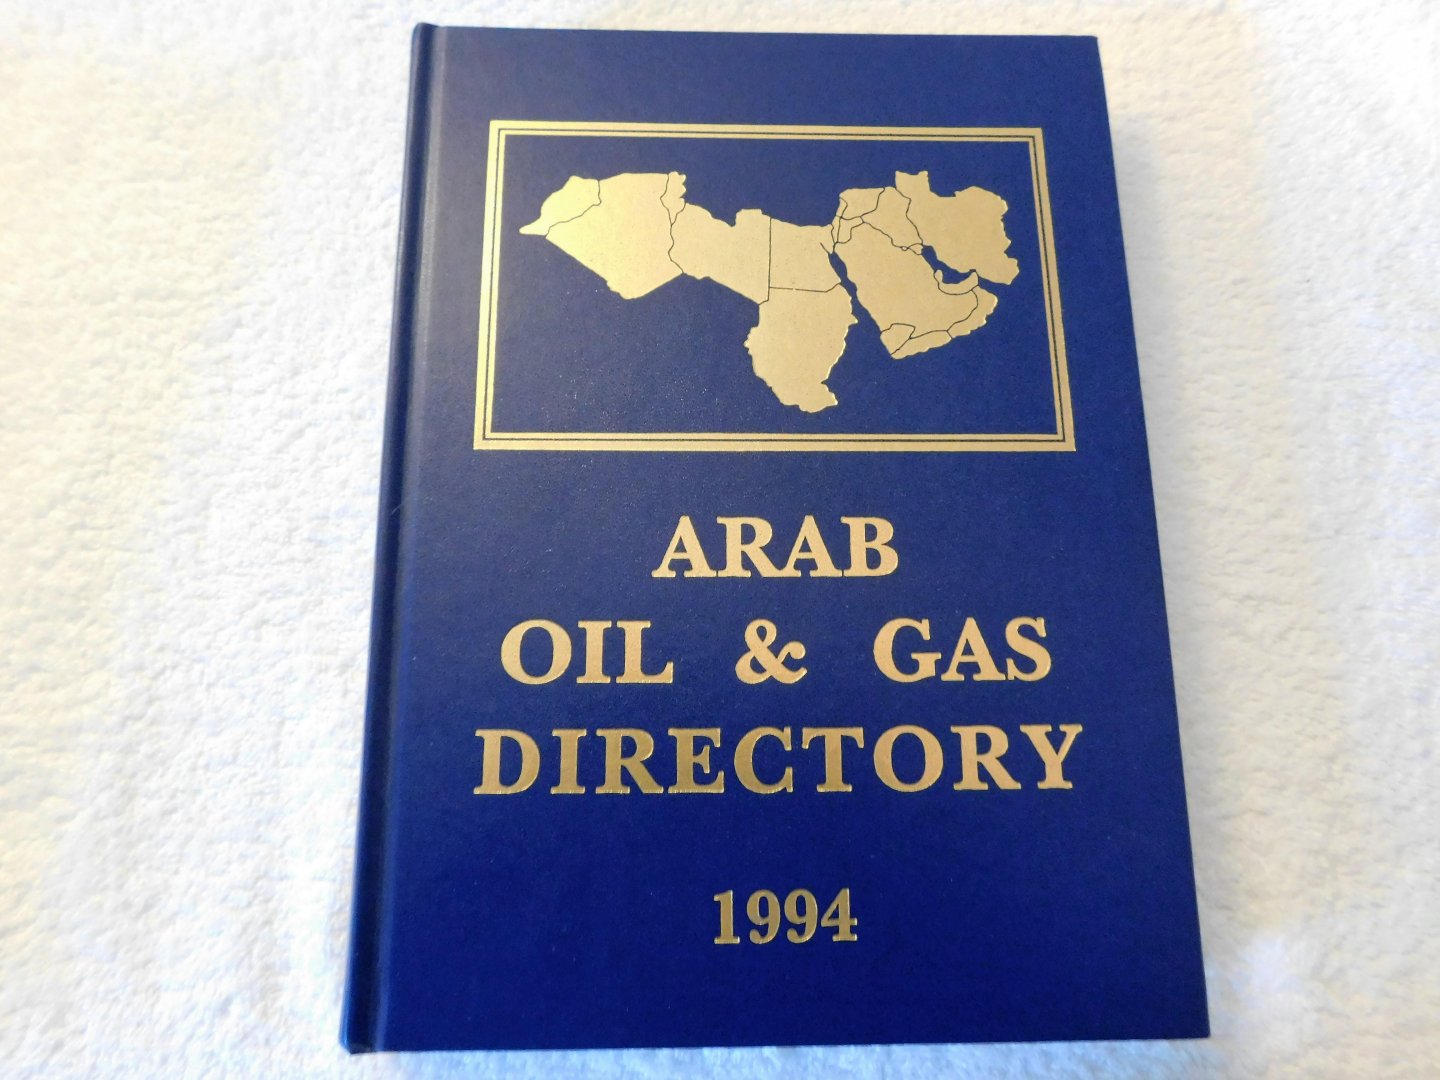 Sarkis - The Arab Oil & Gas Directory  1994